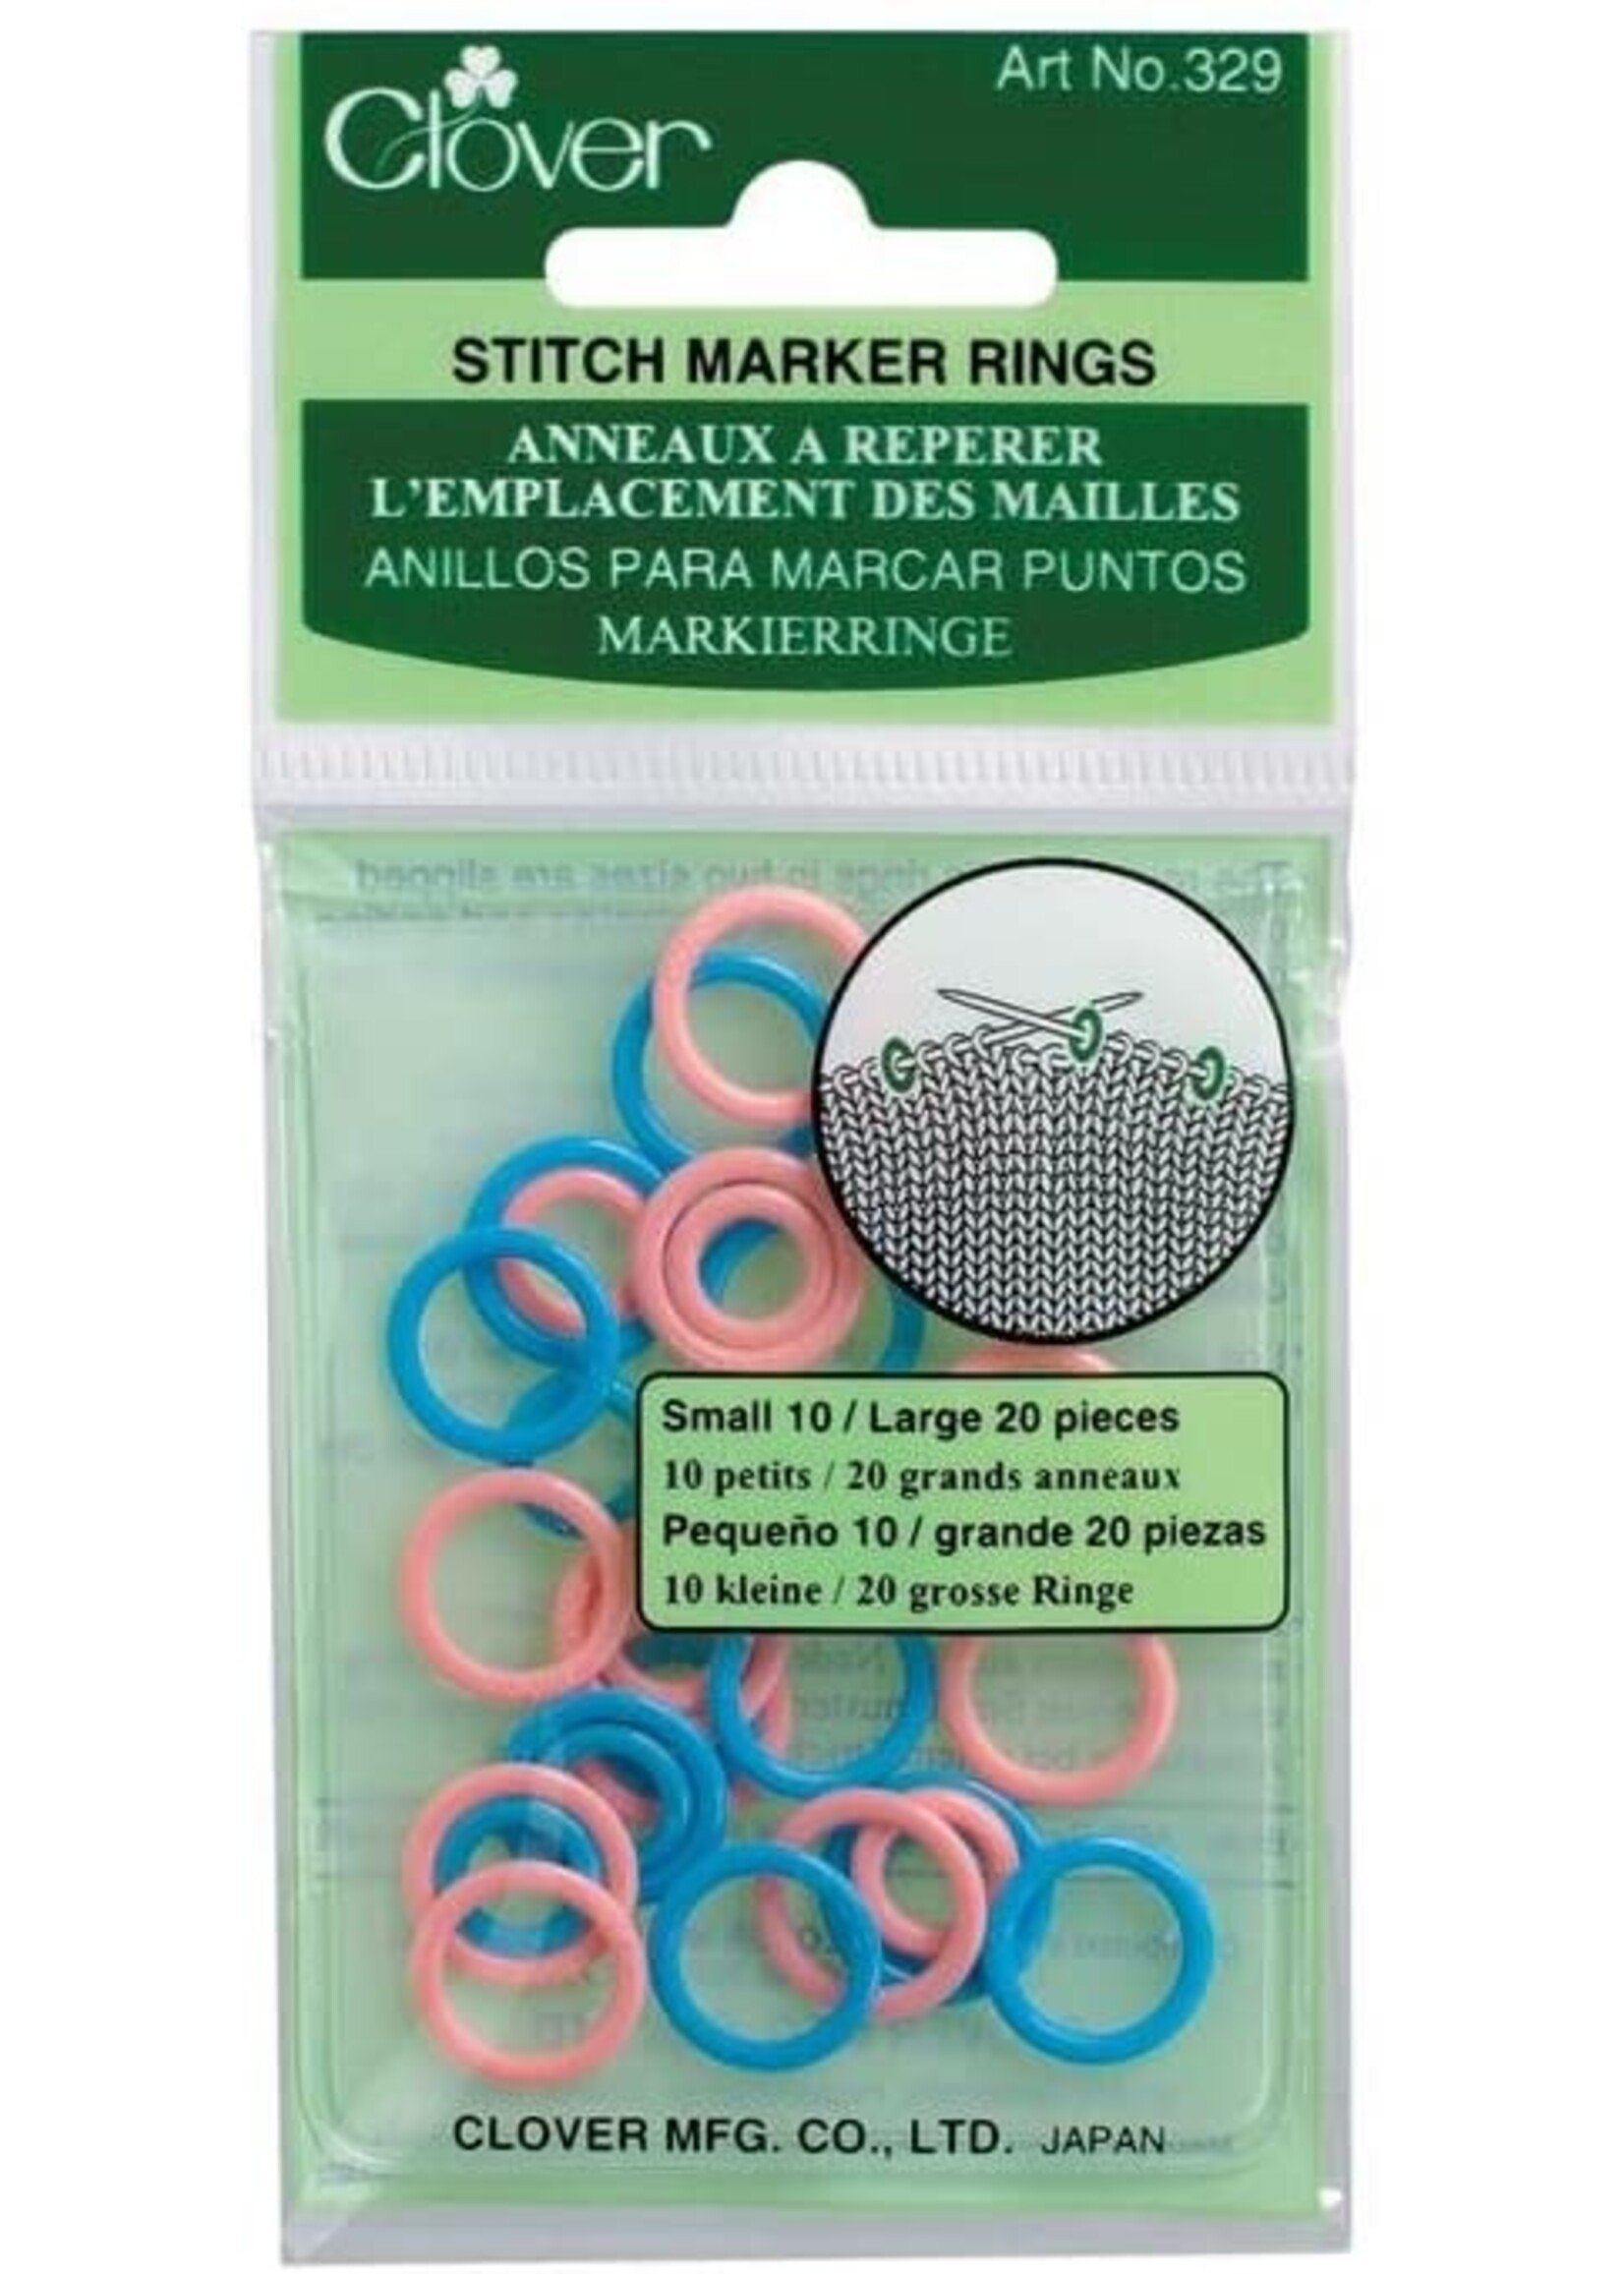 Clover Clover Ring markers 329